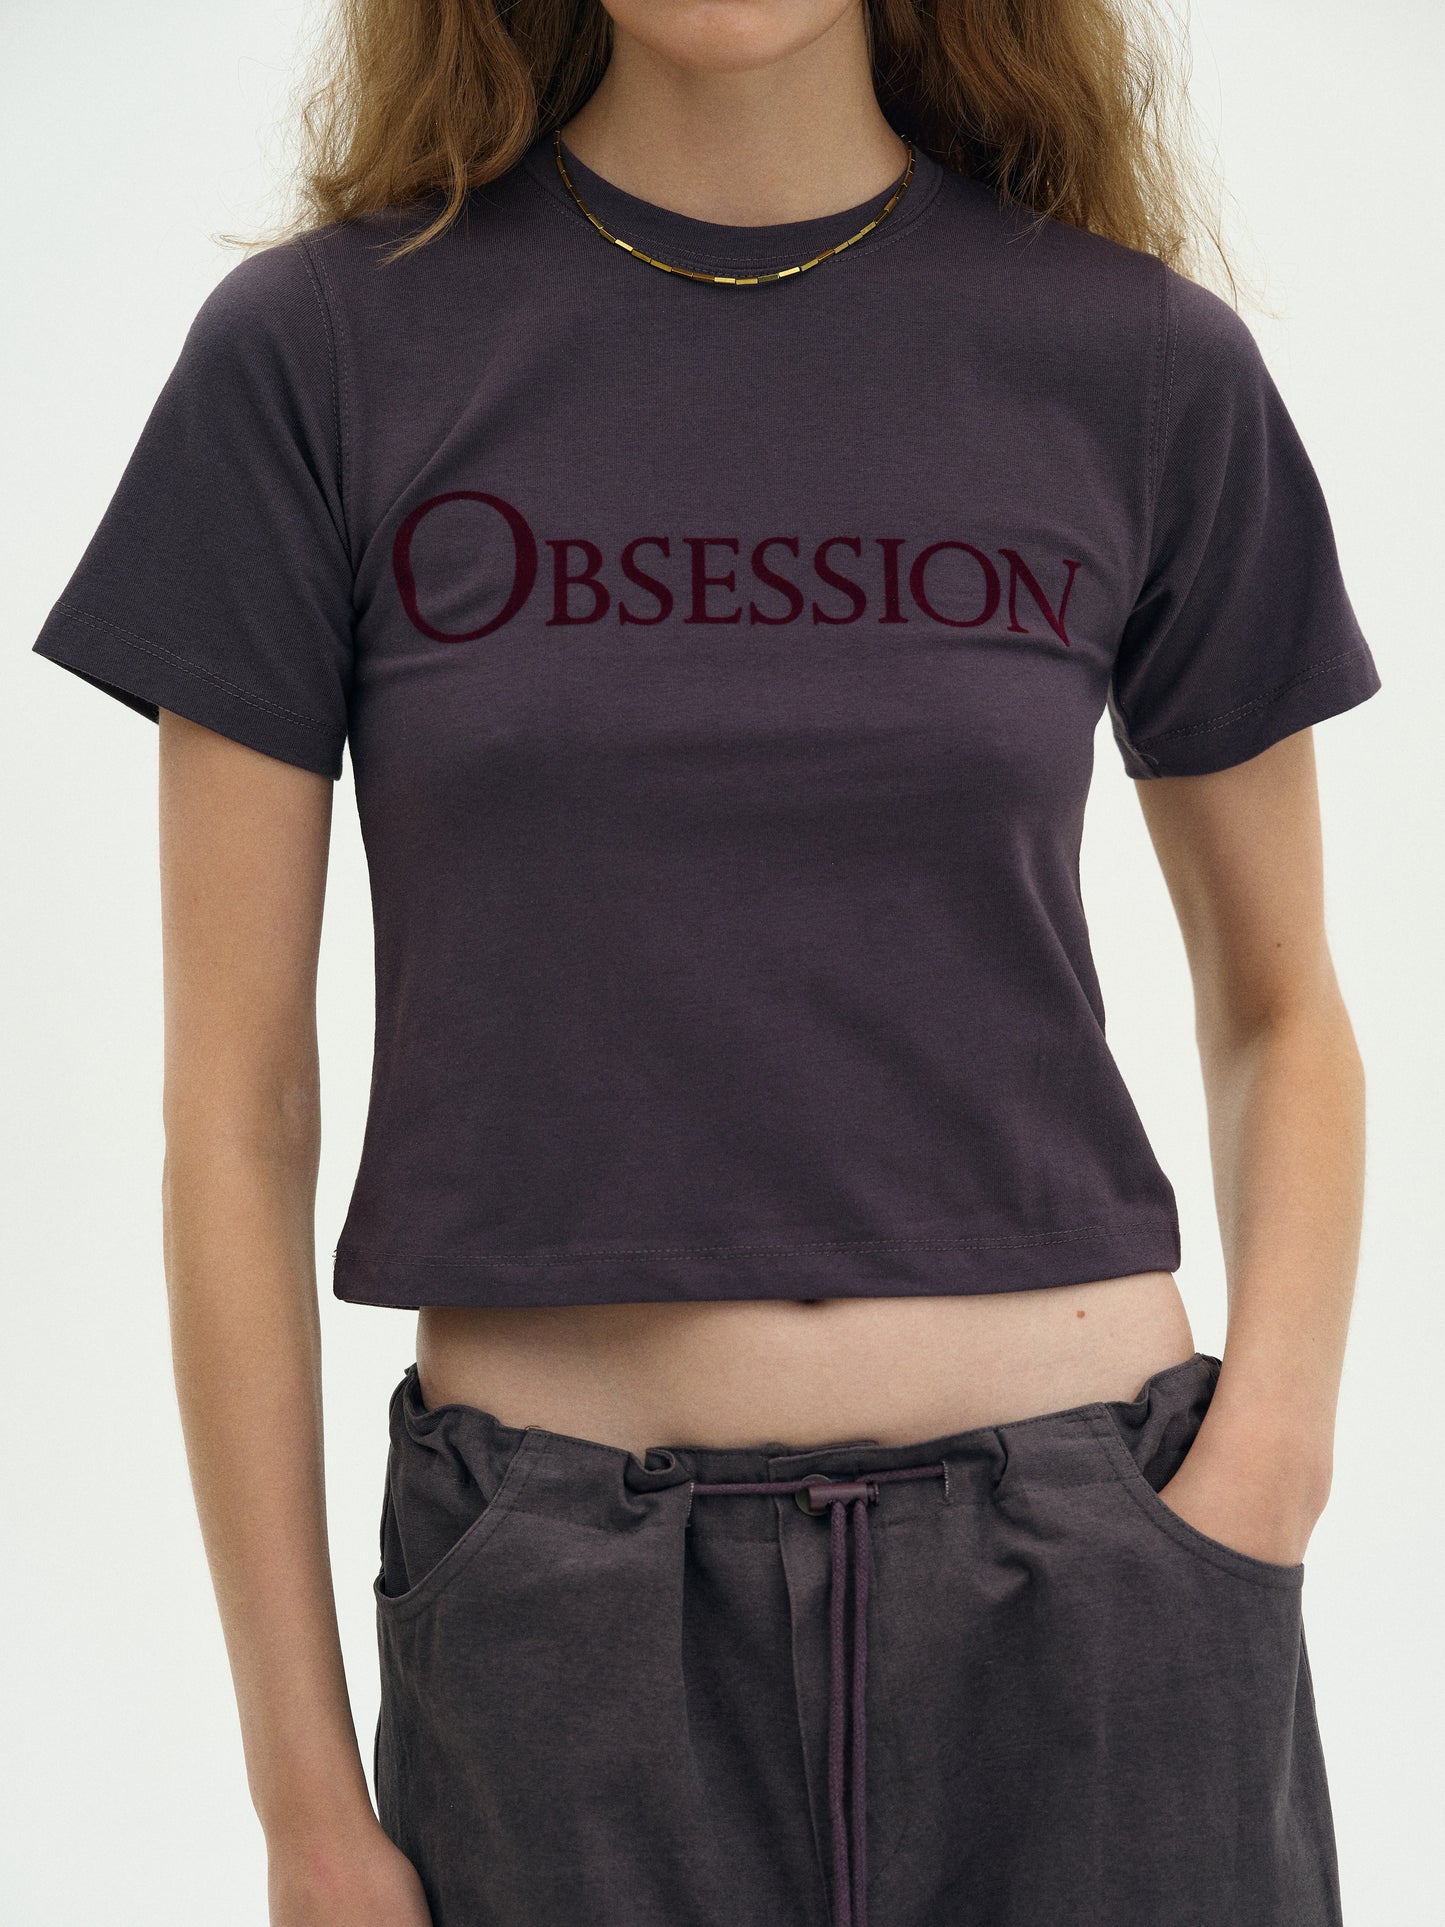 'Obsession' Baby T-Shirt, Plum